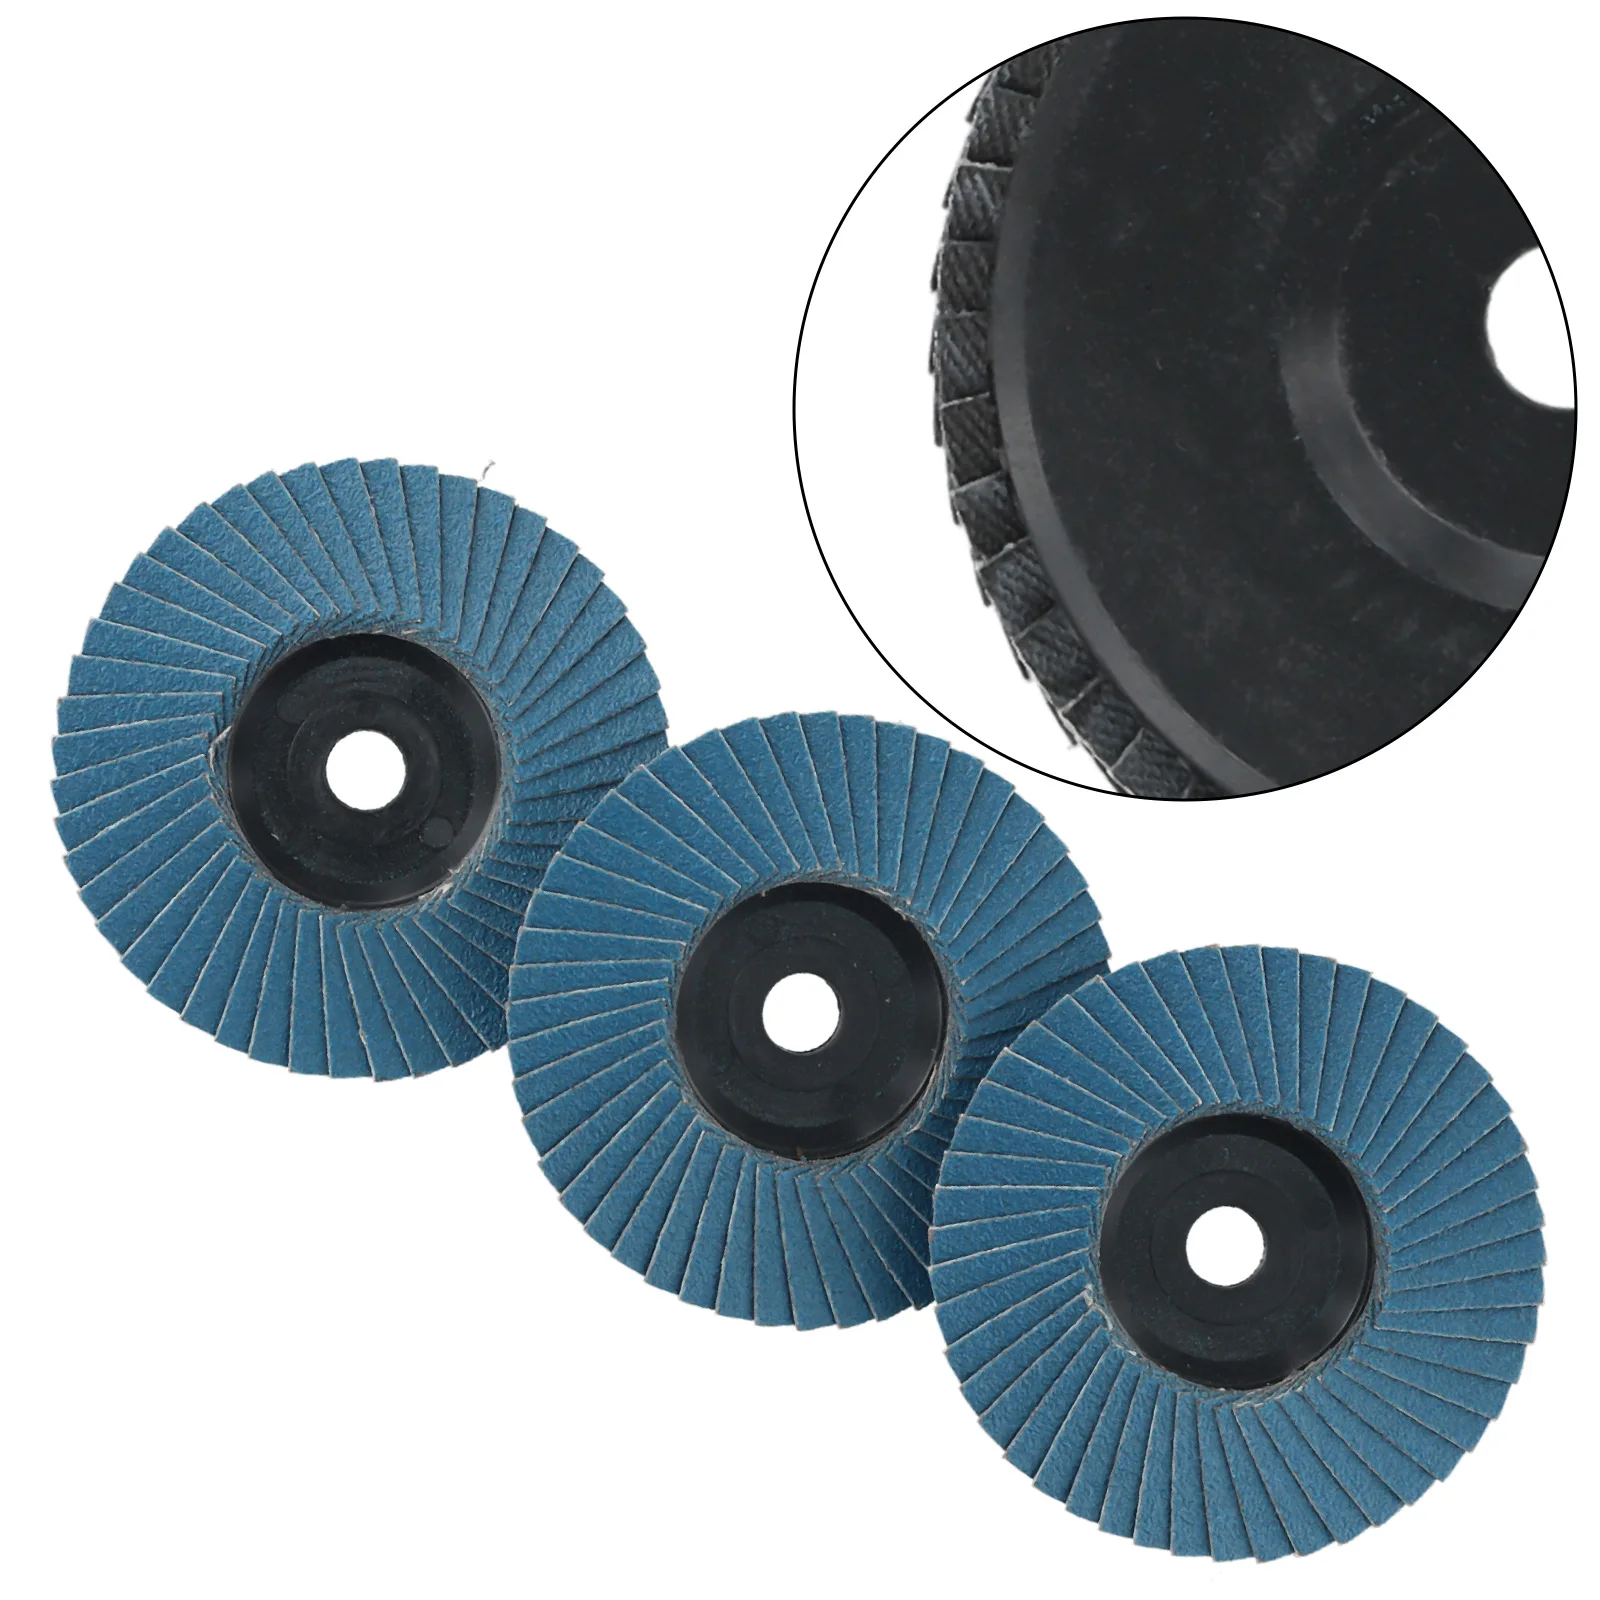 

3pcs 3 Inch Flat Flap Discs 75mm Grinding Wheels Wood Cutting For Angle Grinder 75mm/3 Inch Aperture 10mm 120 Grains Of Sand